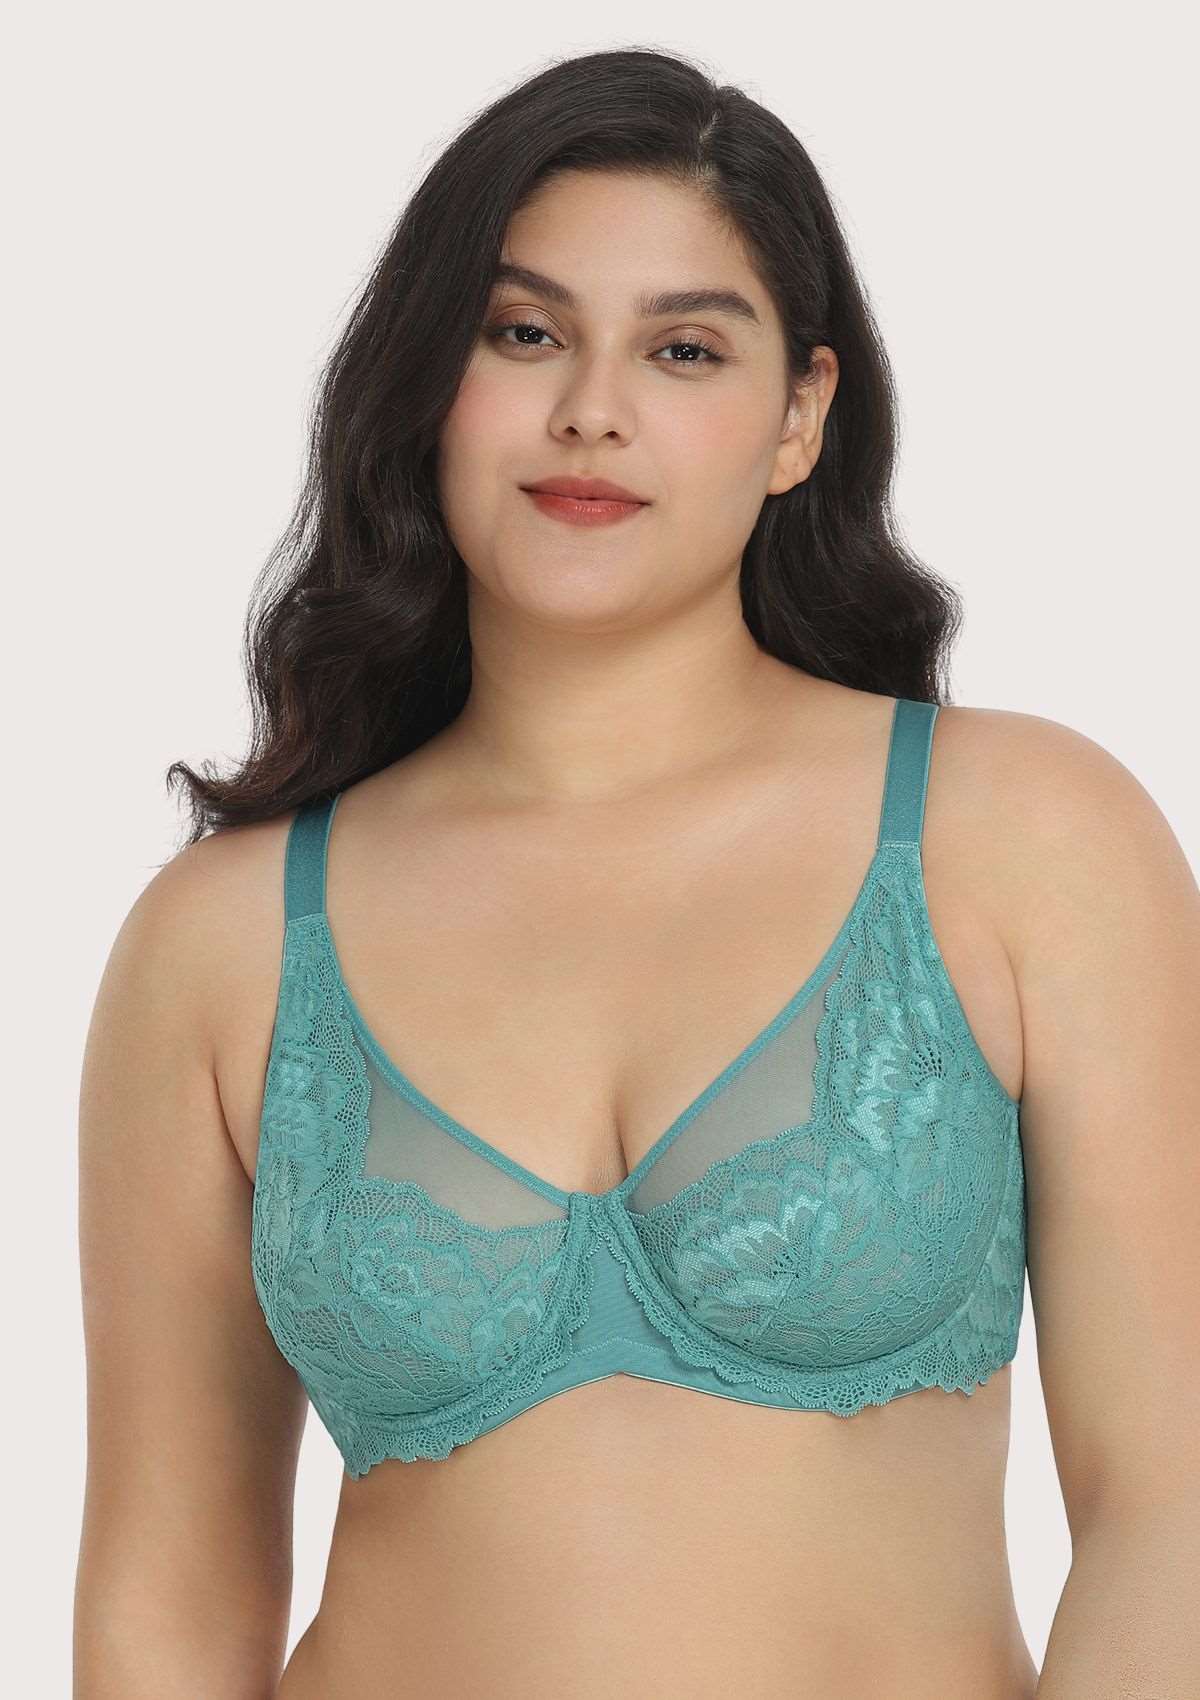 HSIA Paeonia Lace Full Coverage Underwire Non-Padded Uplifting Bra - Teal / 38 / DDD/F